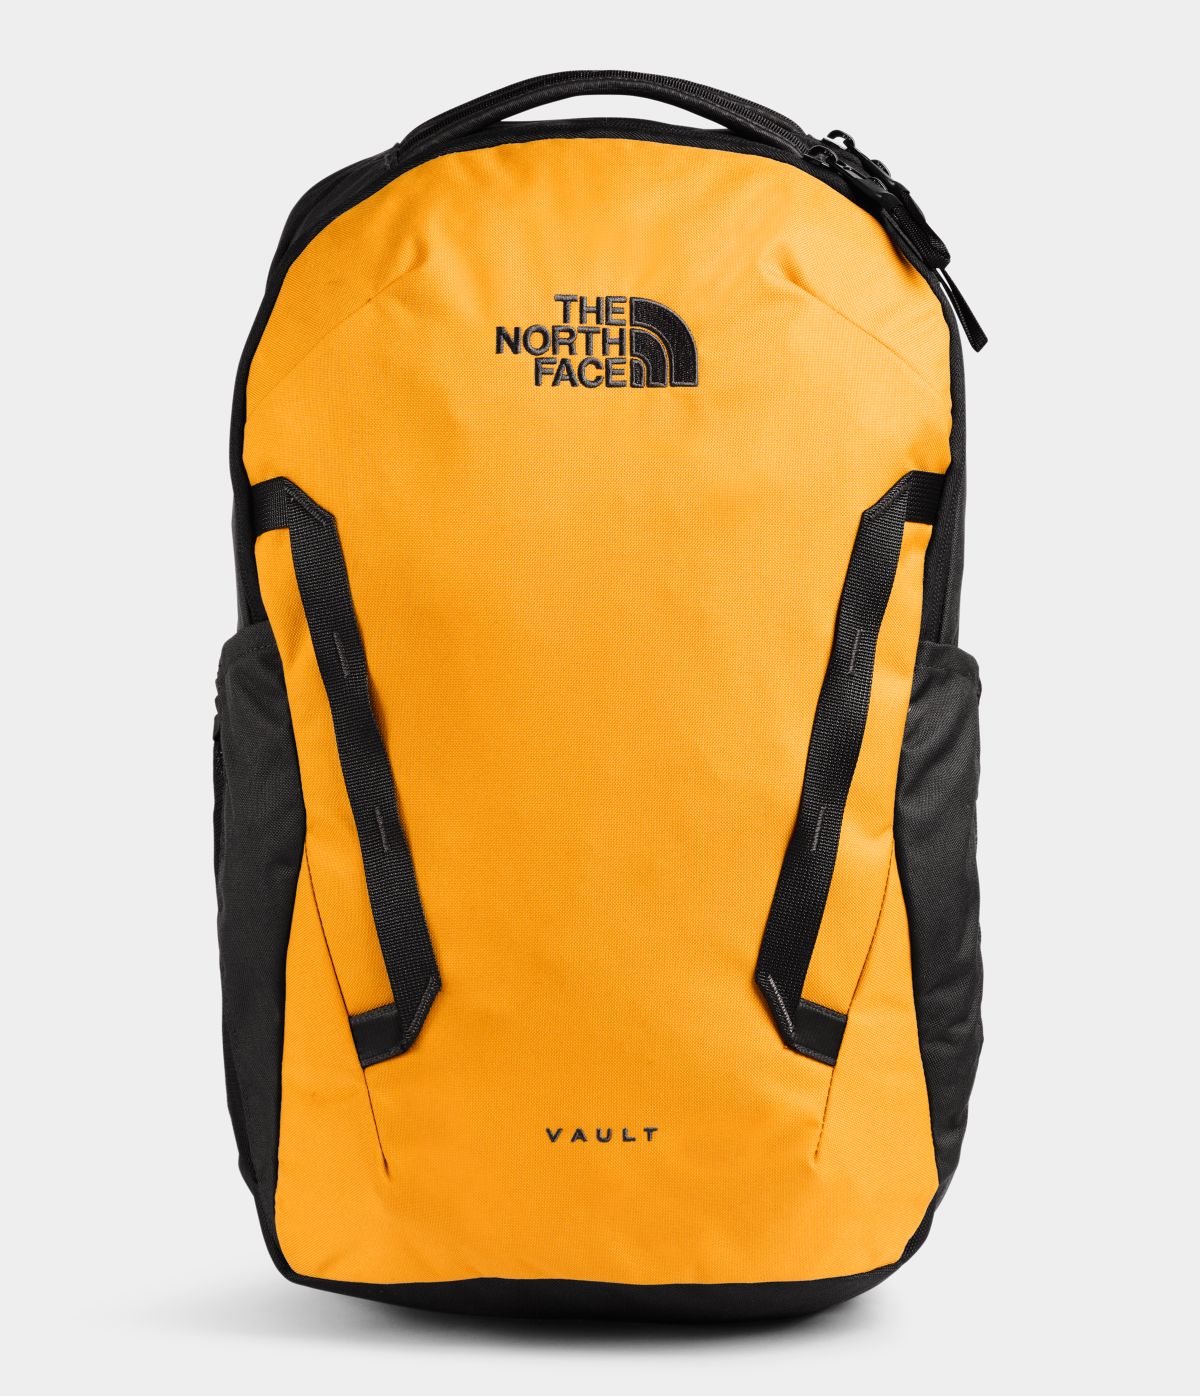 Unisex The North Face Vault Backpack in Summit Gold/TNF Black from front view